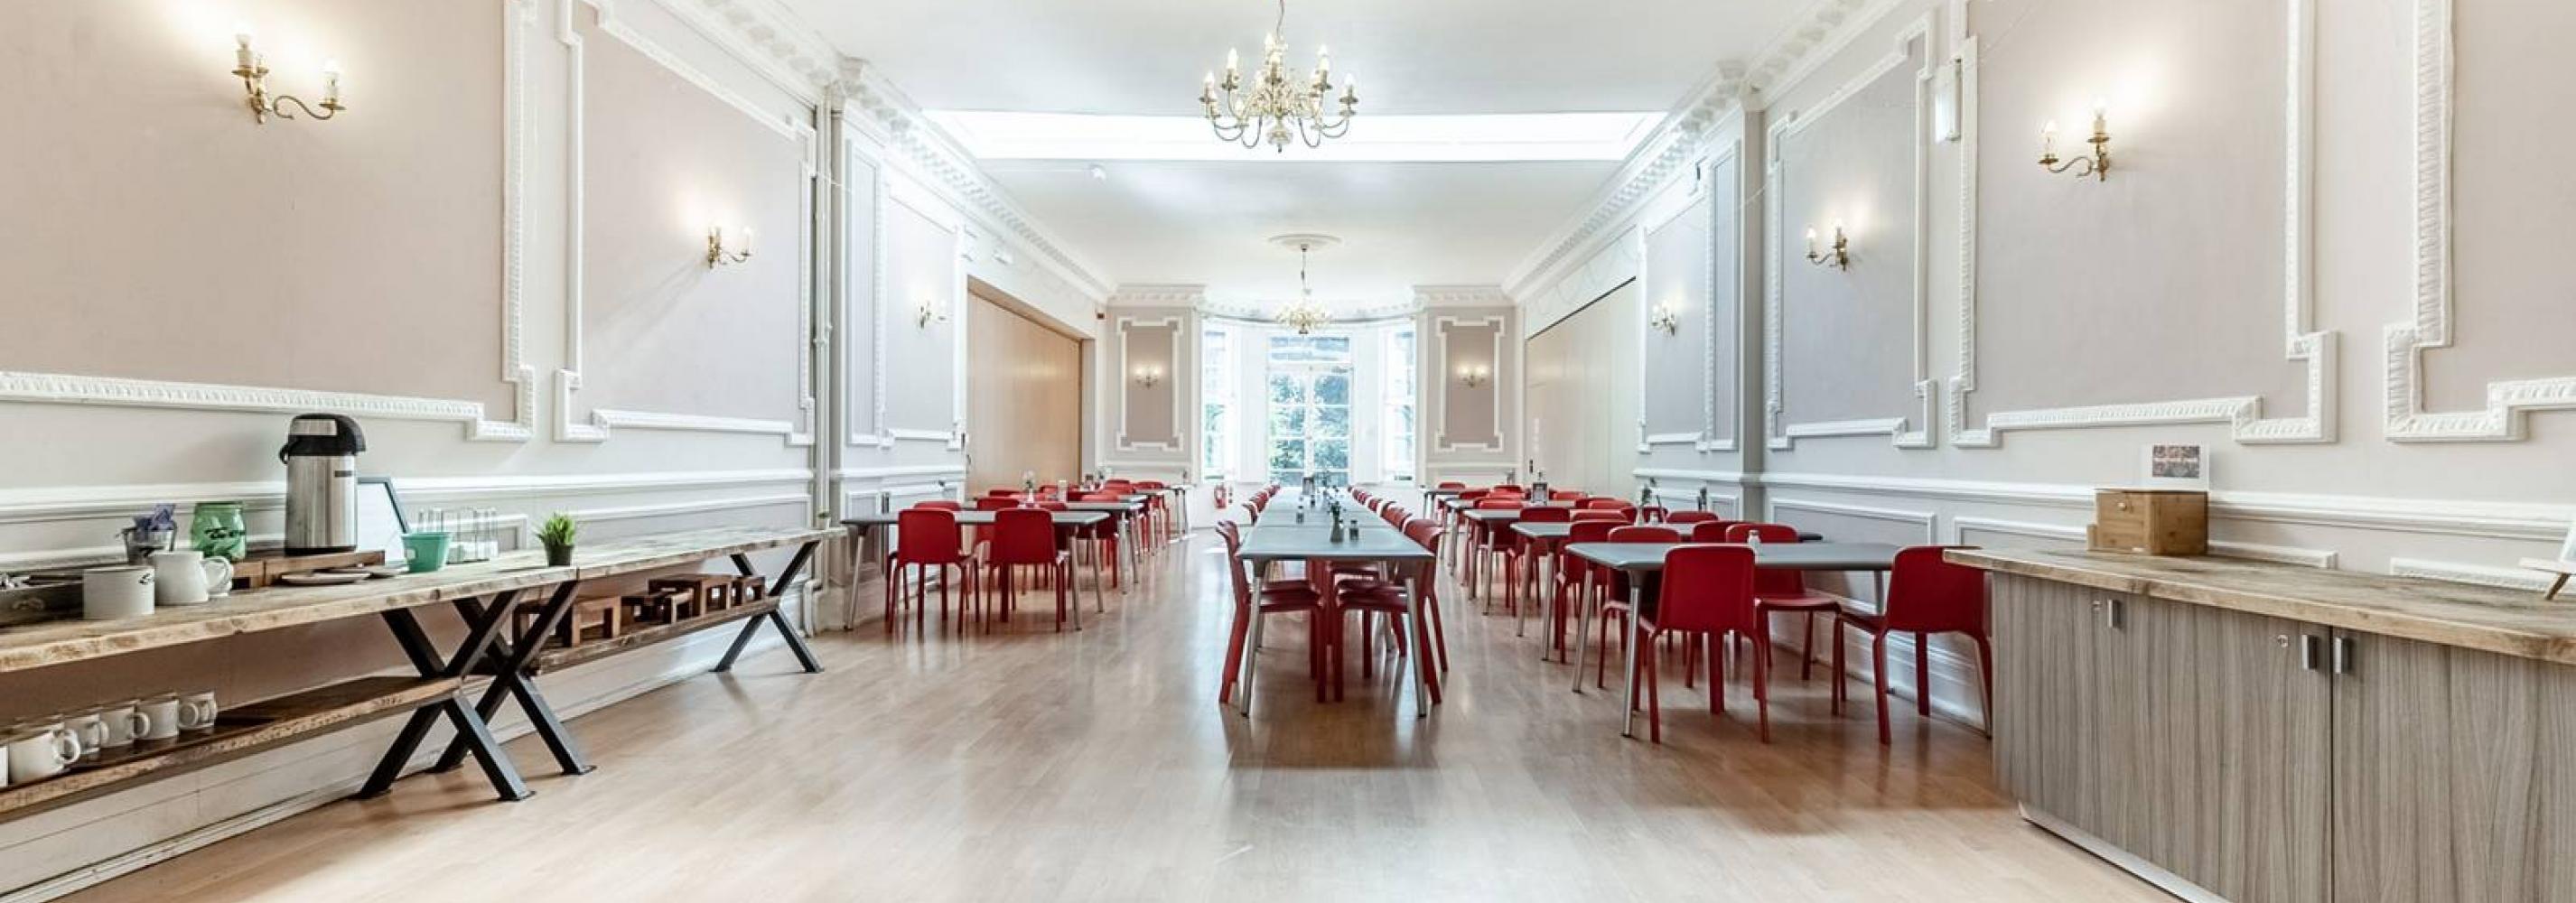 Student dining hall of Lee Abbey London served by our catering service